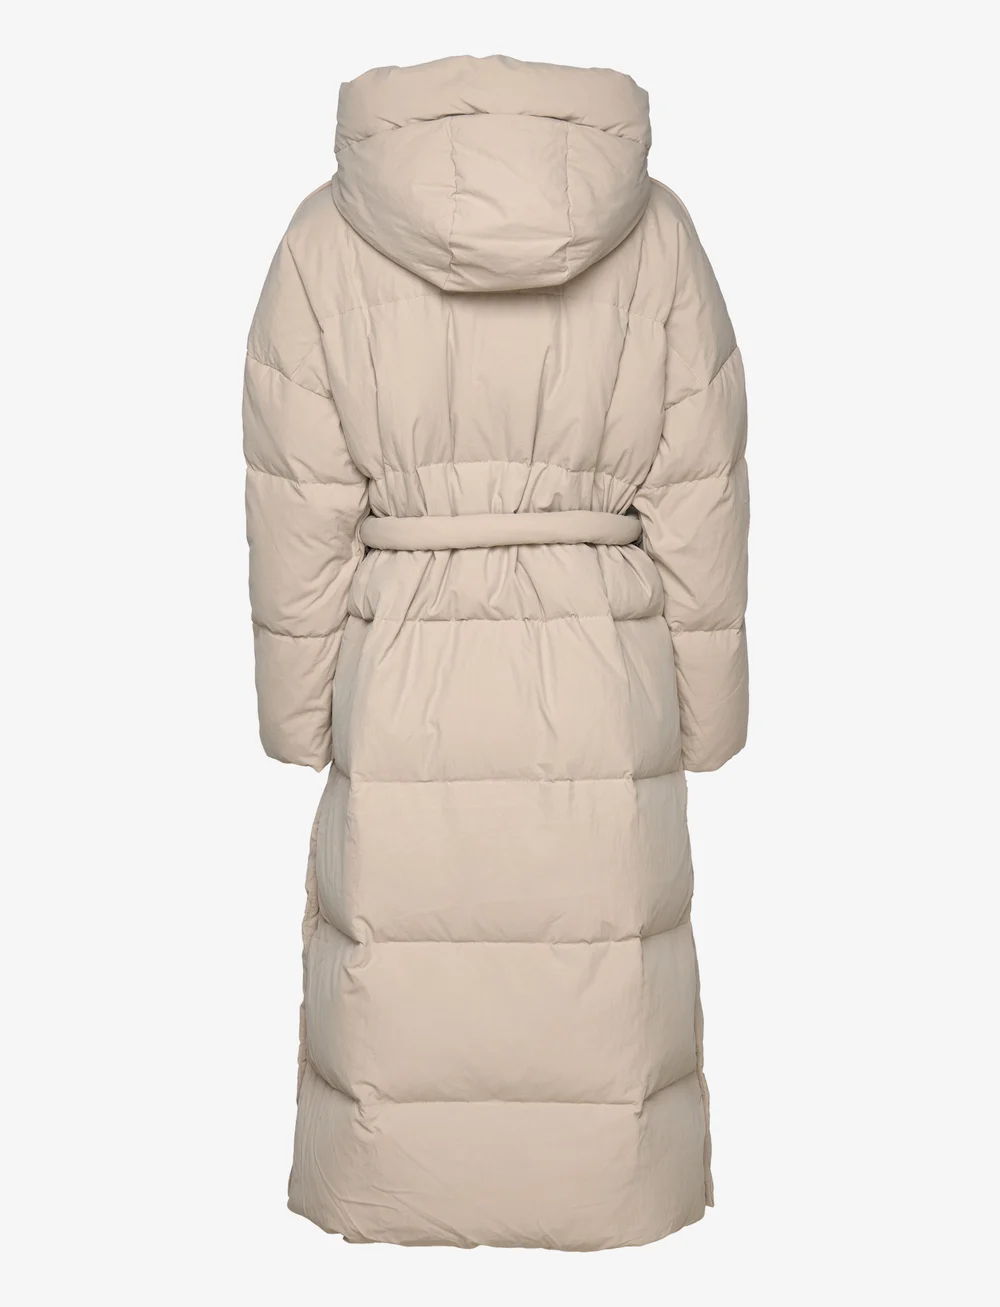 Esprit Casual Long Puffer Coat - 249 €. Buy Padded Coats from